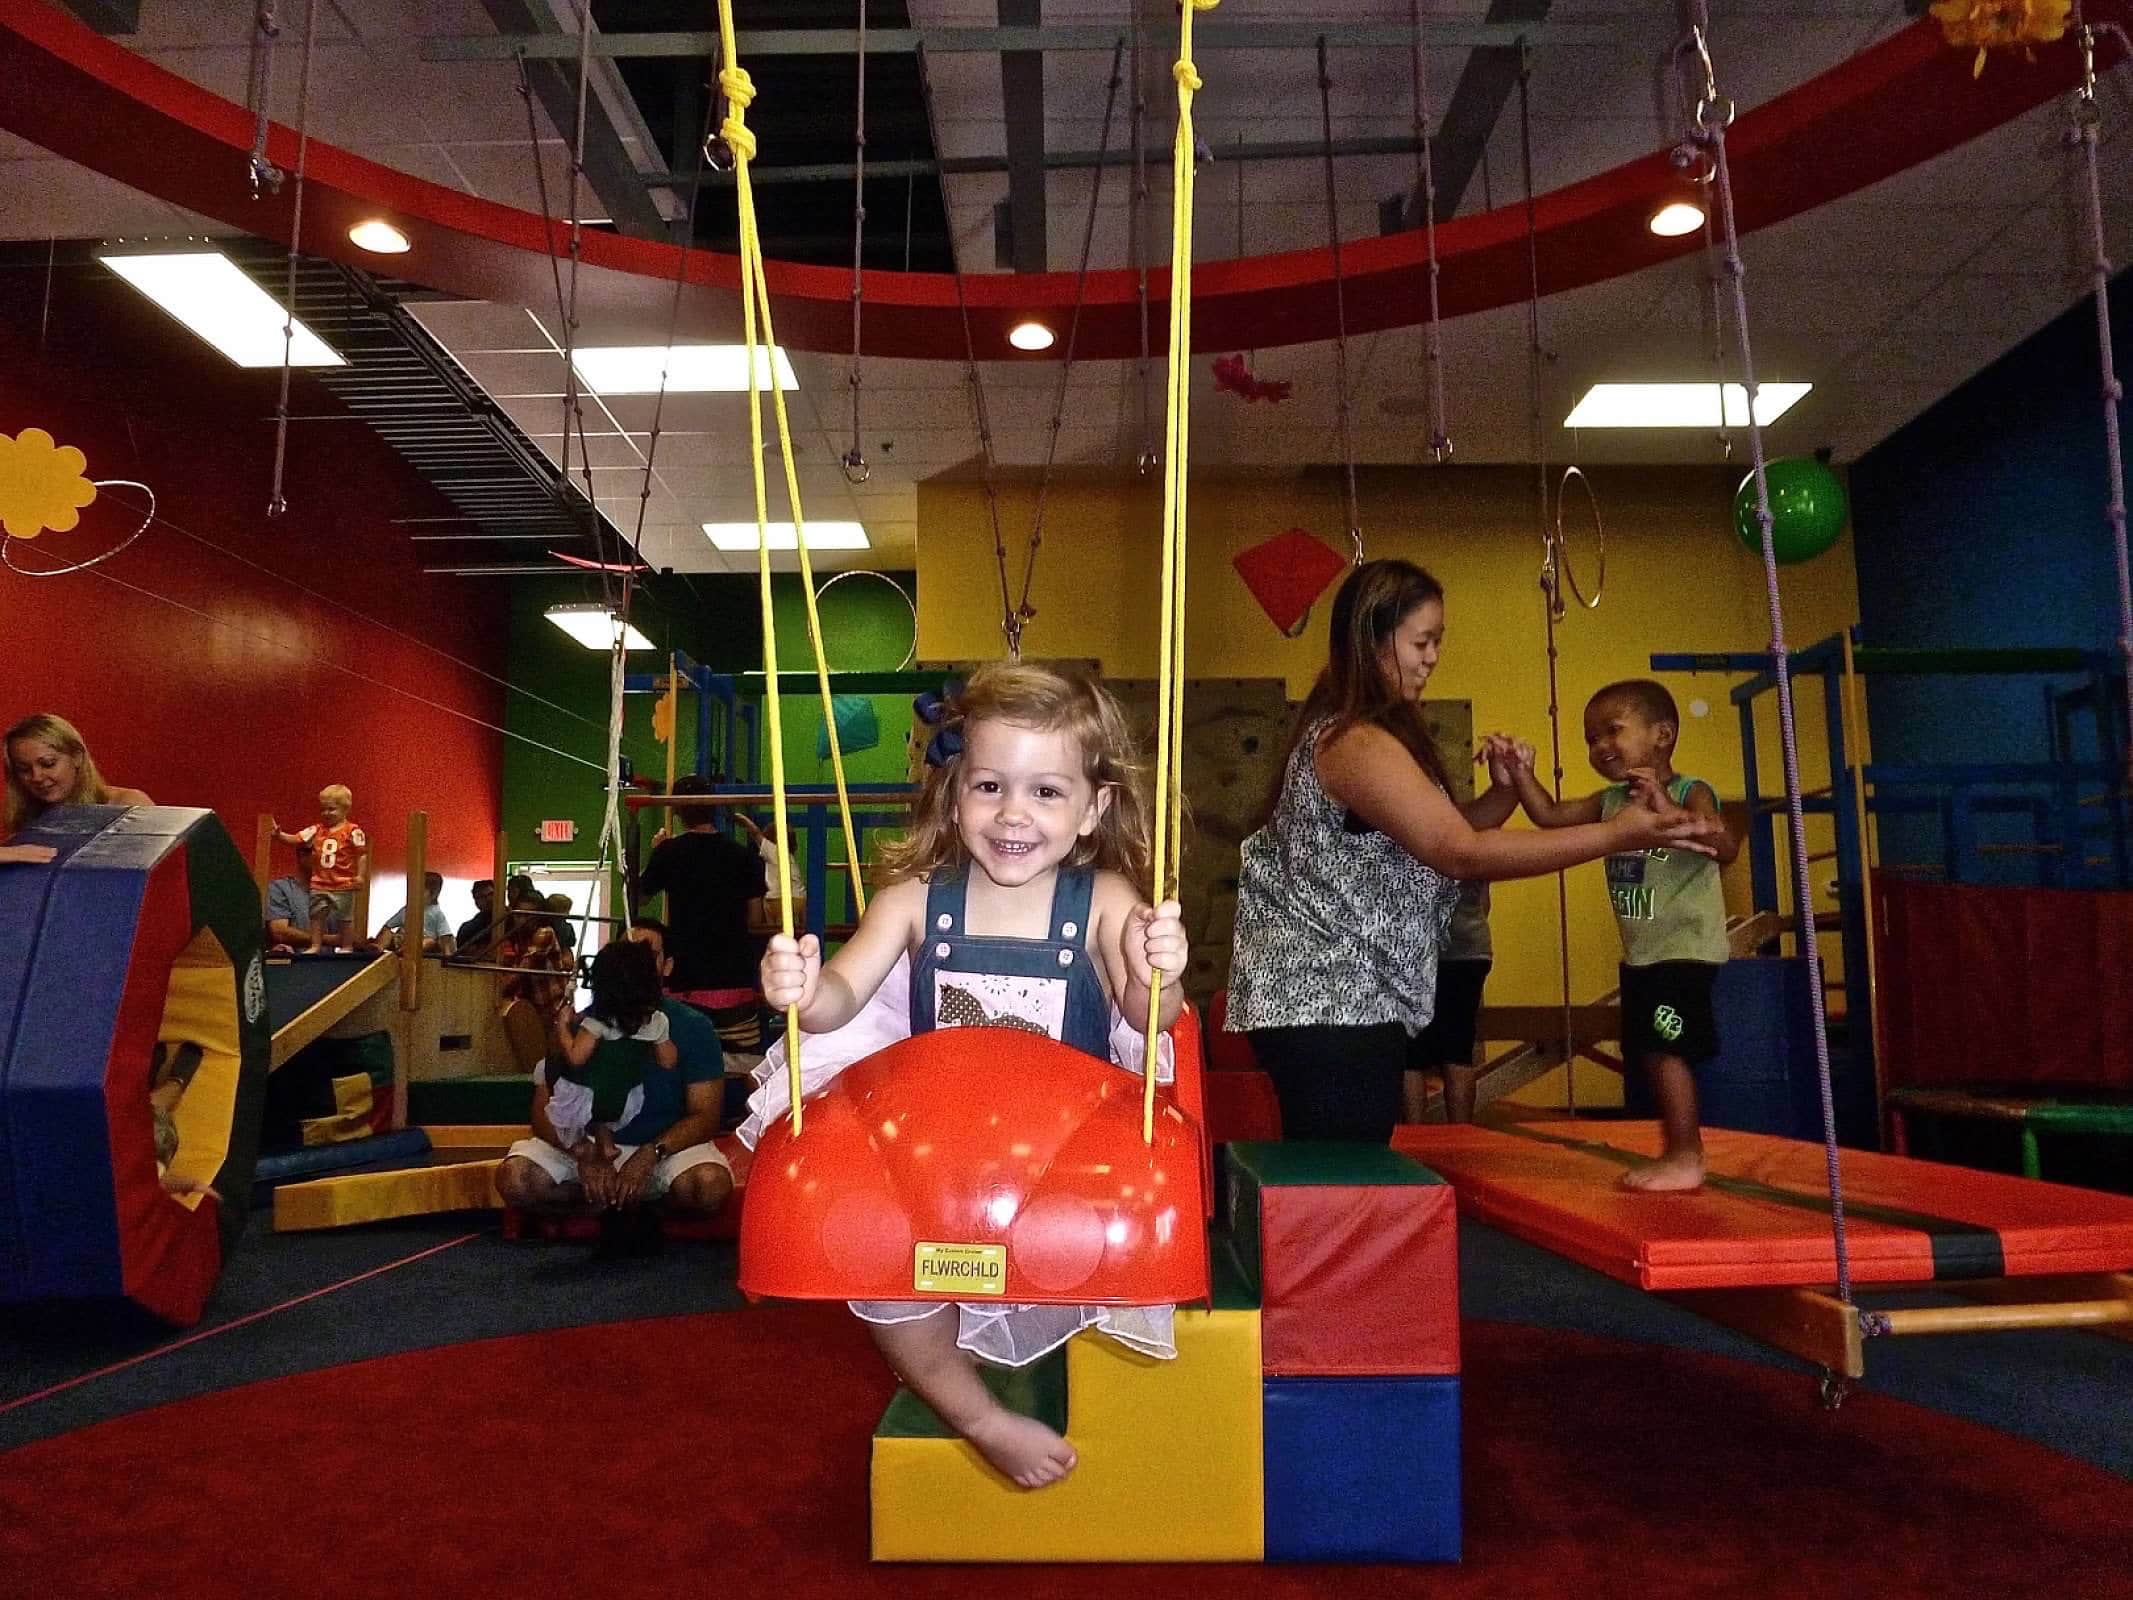 A child playing on a swing in a play room.